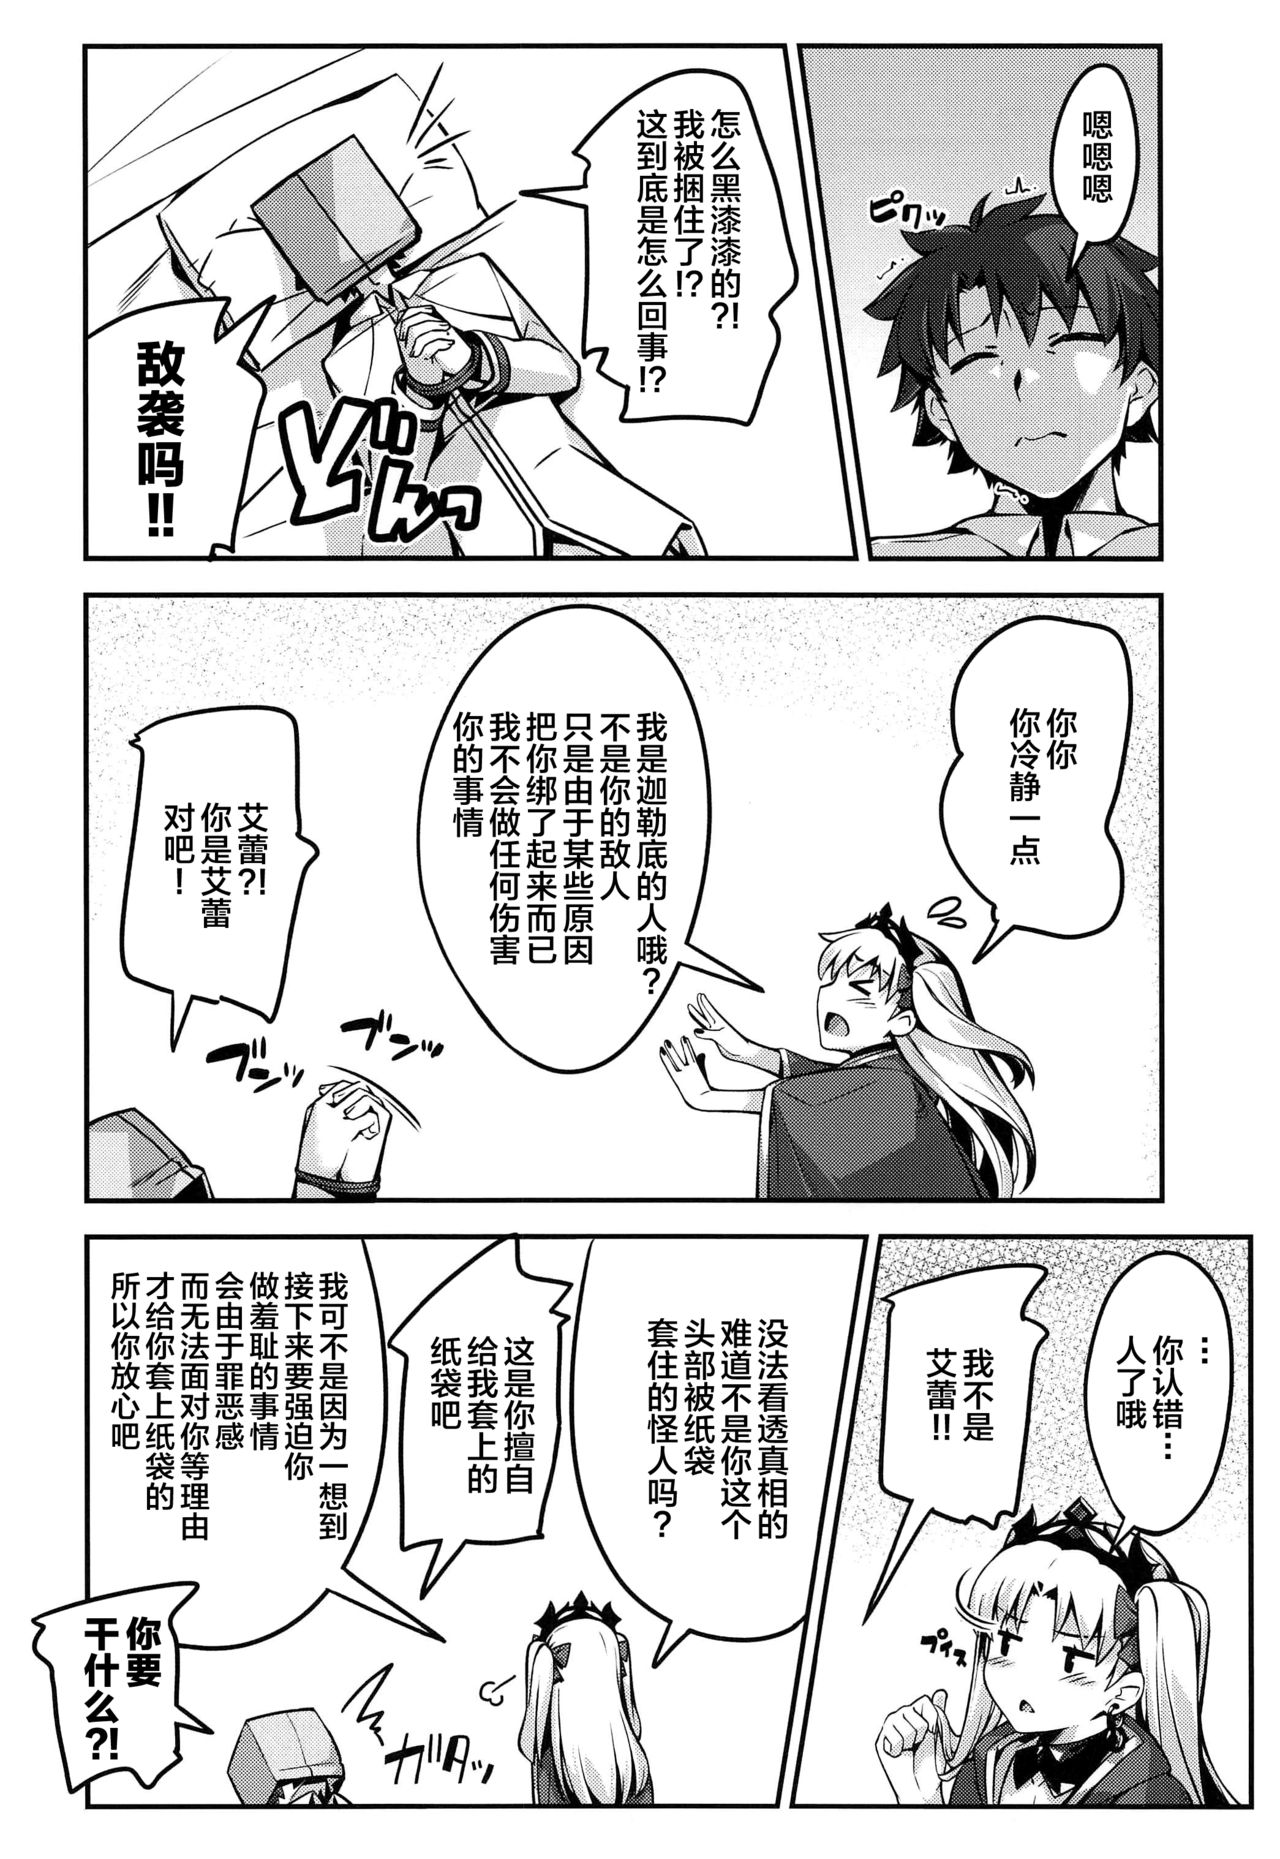 (C97) [Kansyouyou Marmotte (Mr.Lostman)] Hiroigui. (Fate/Grand Order) [Chinese] [黎欧×新桥月白日语社] page 7 full